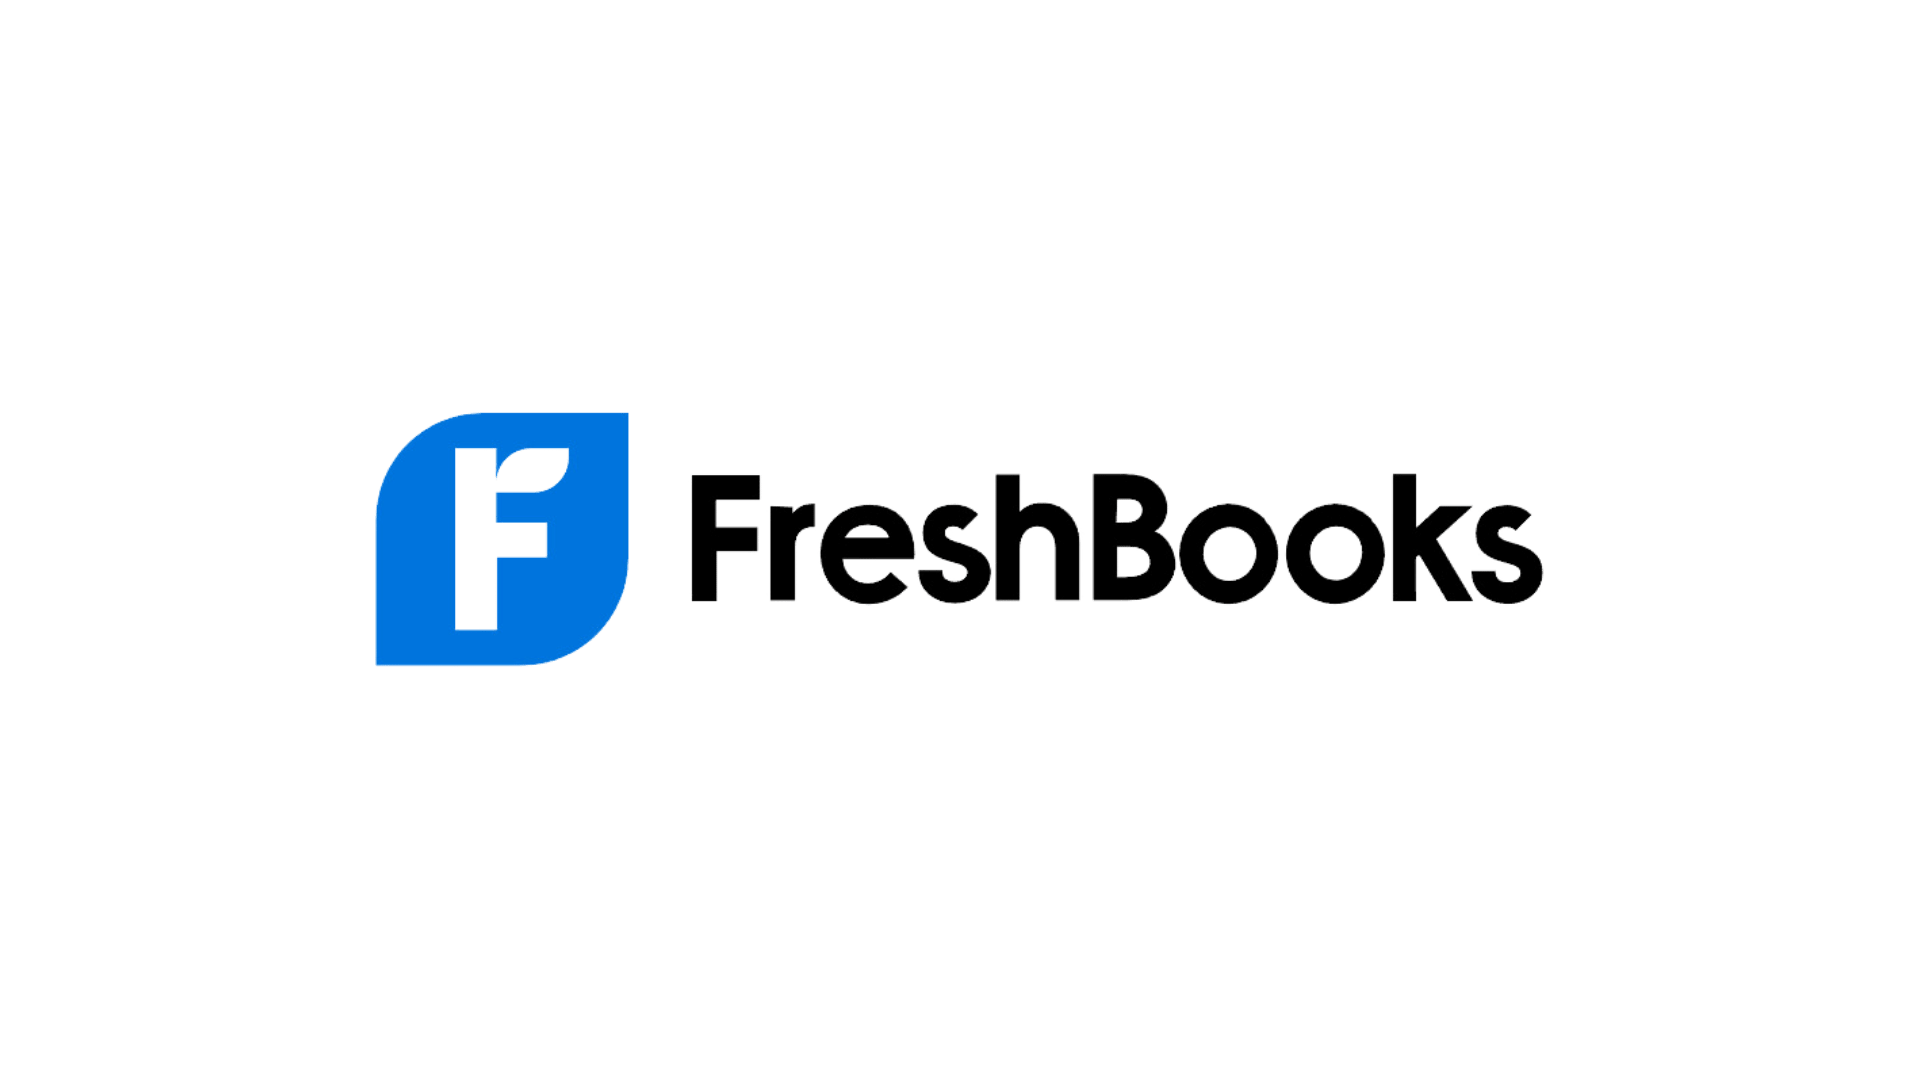 FreshBooks Questions and Answers